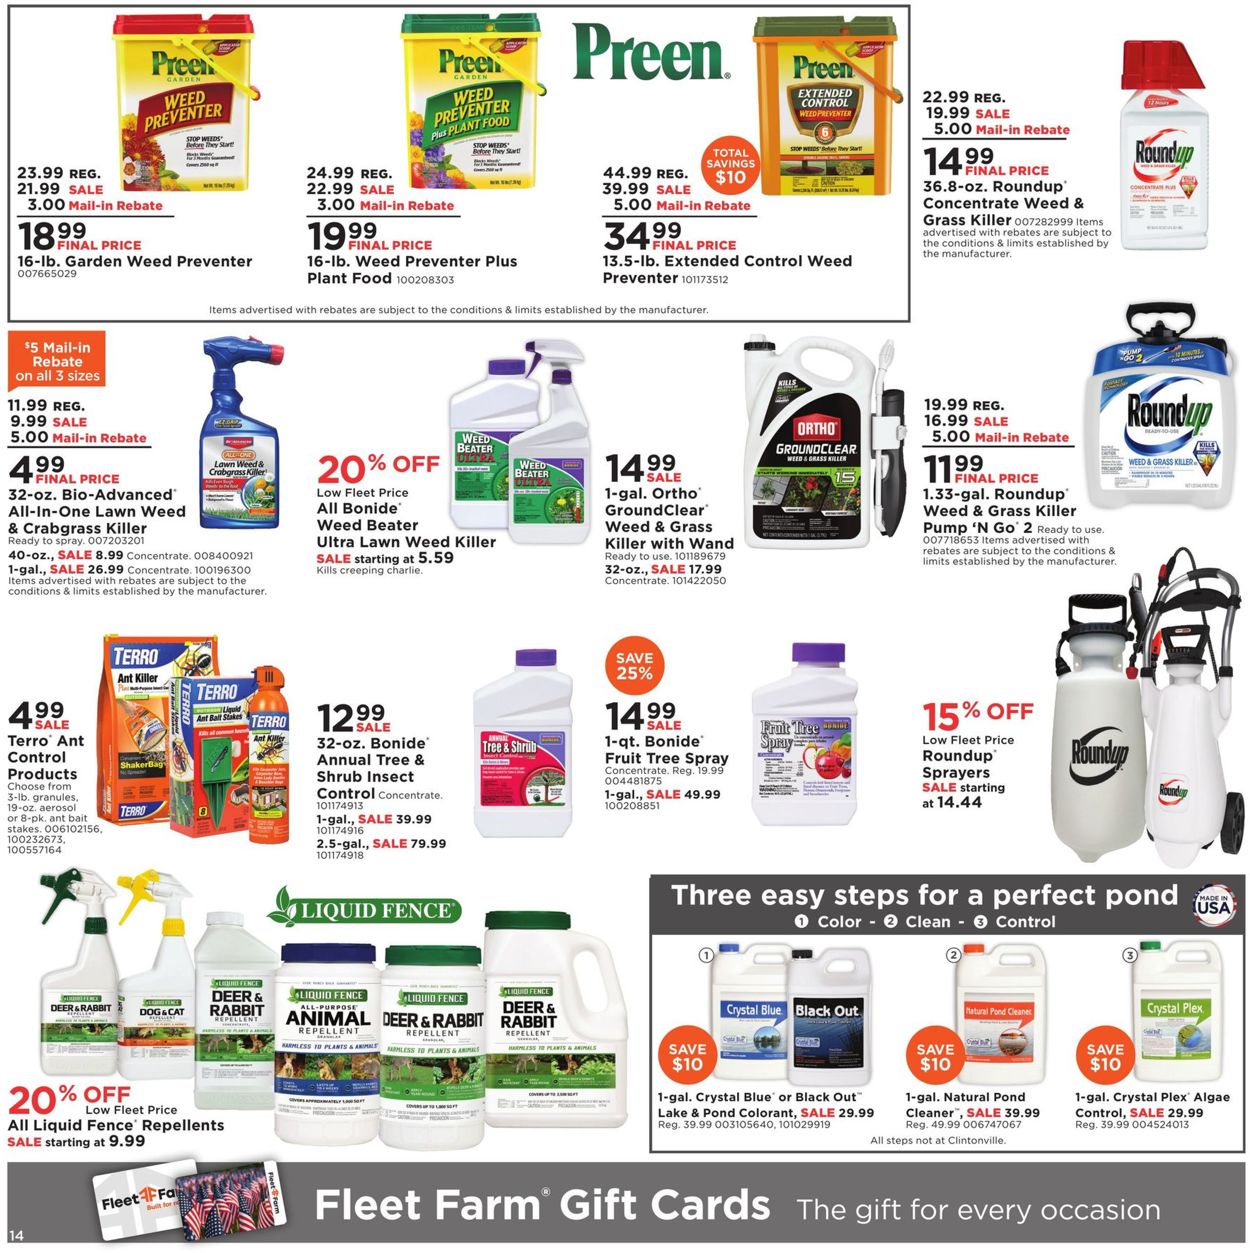 mills-fleet-farm-current-weekly-ad-04-17-04-25-2020-14-frequent